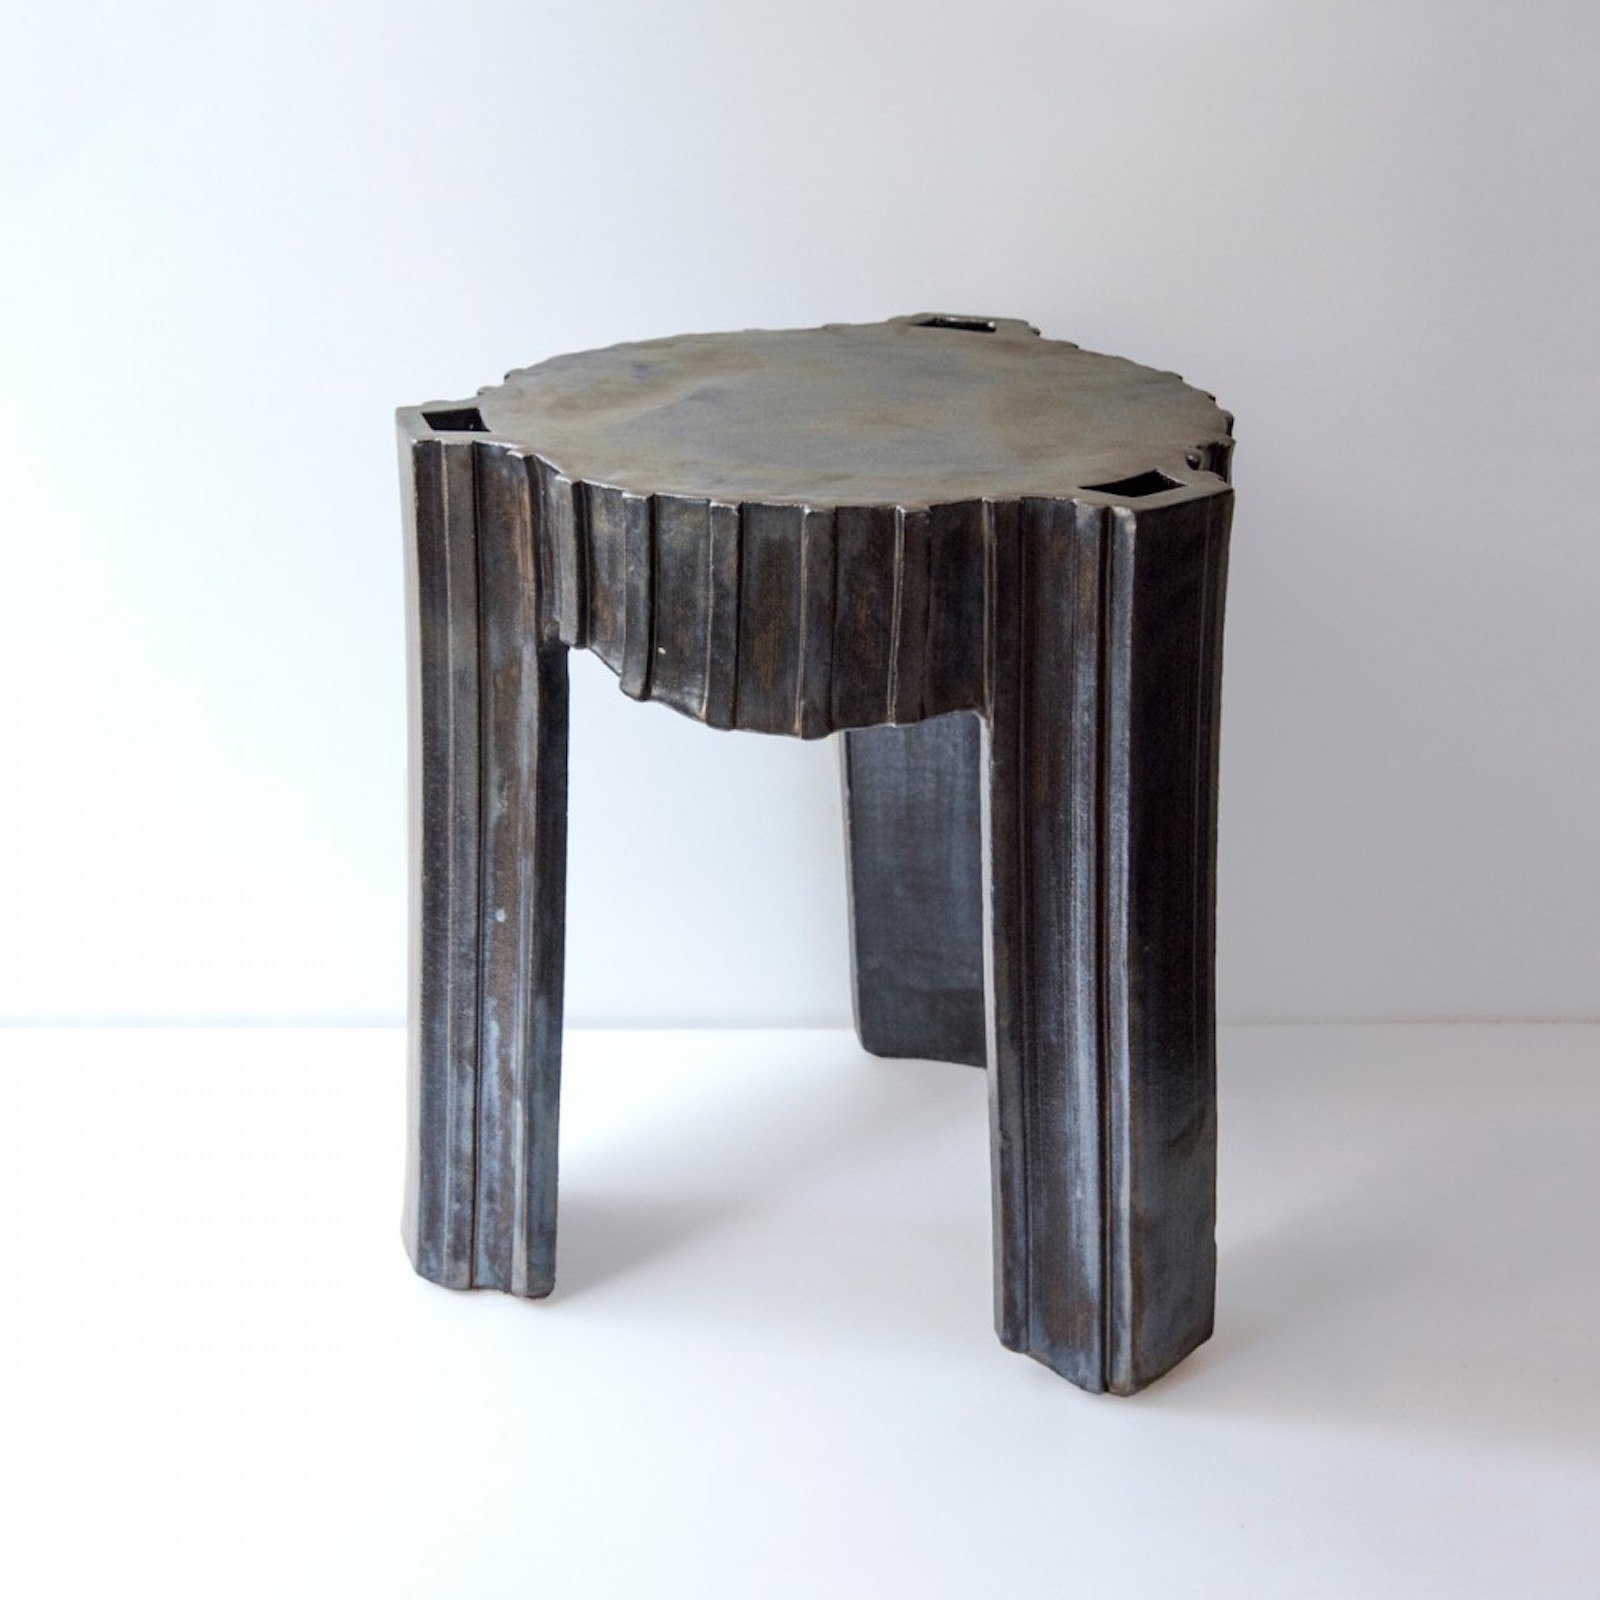 Floris Wubben’s Distinctive Furniture Designs Are Inspired By The Earth ...